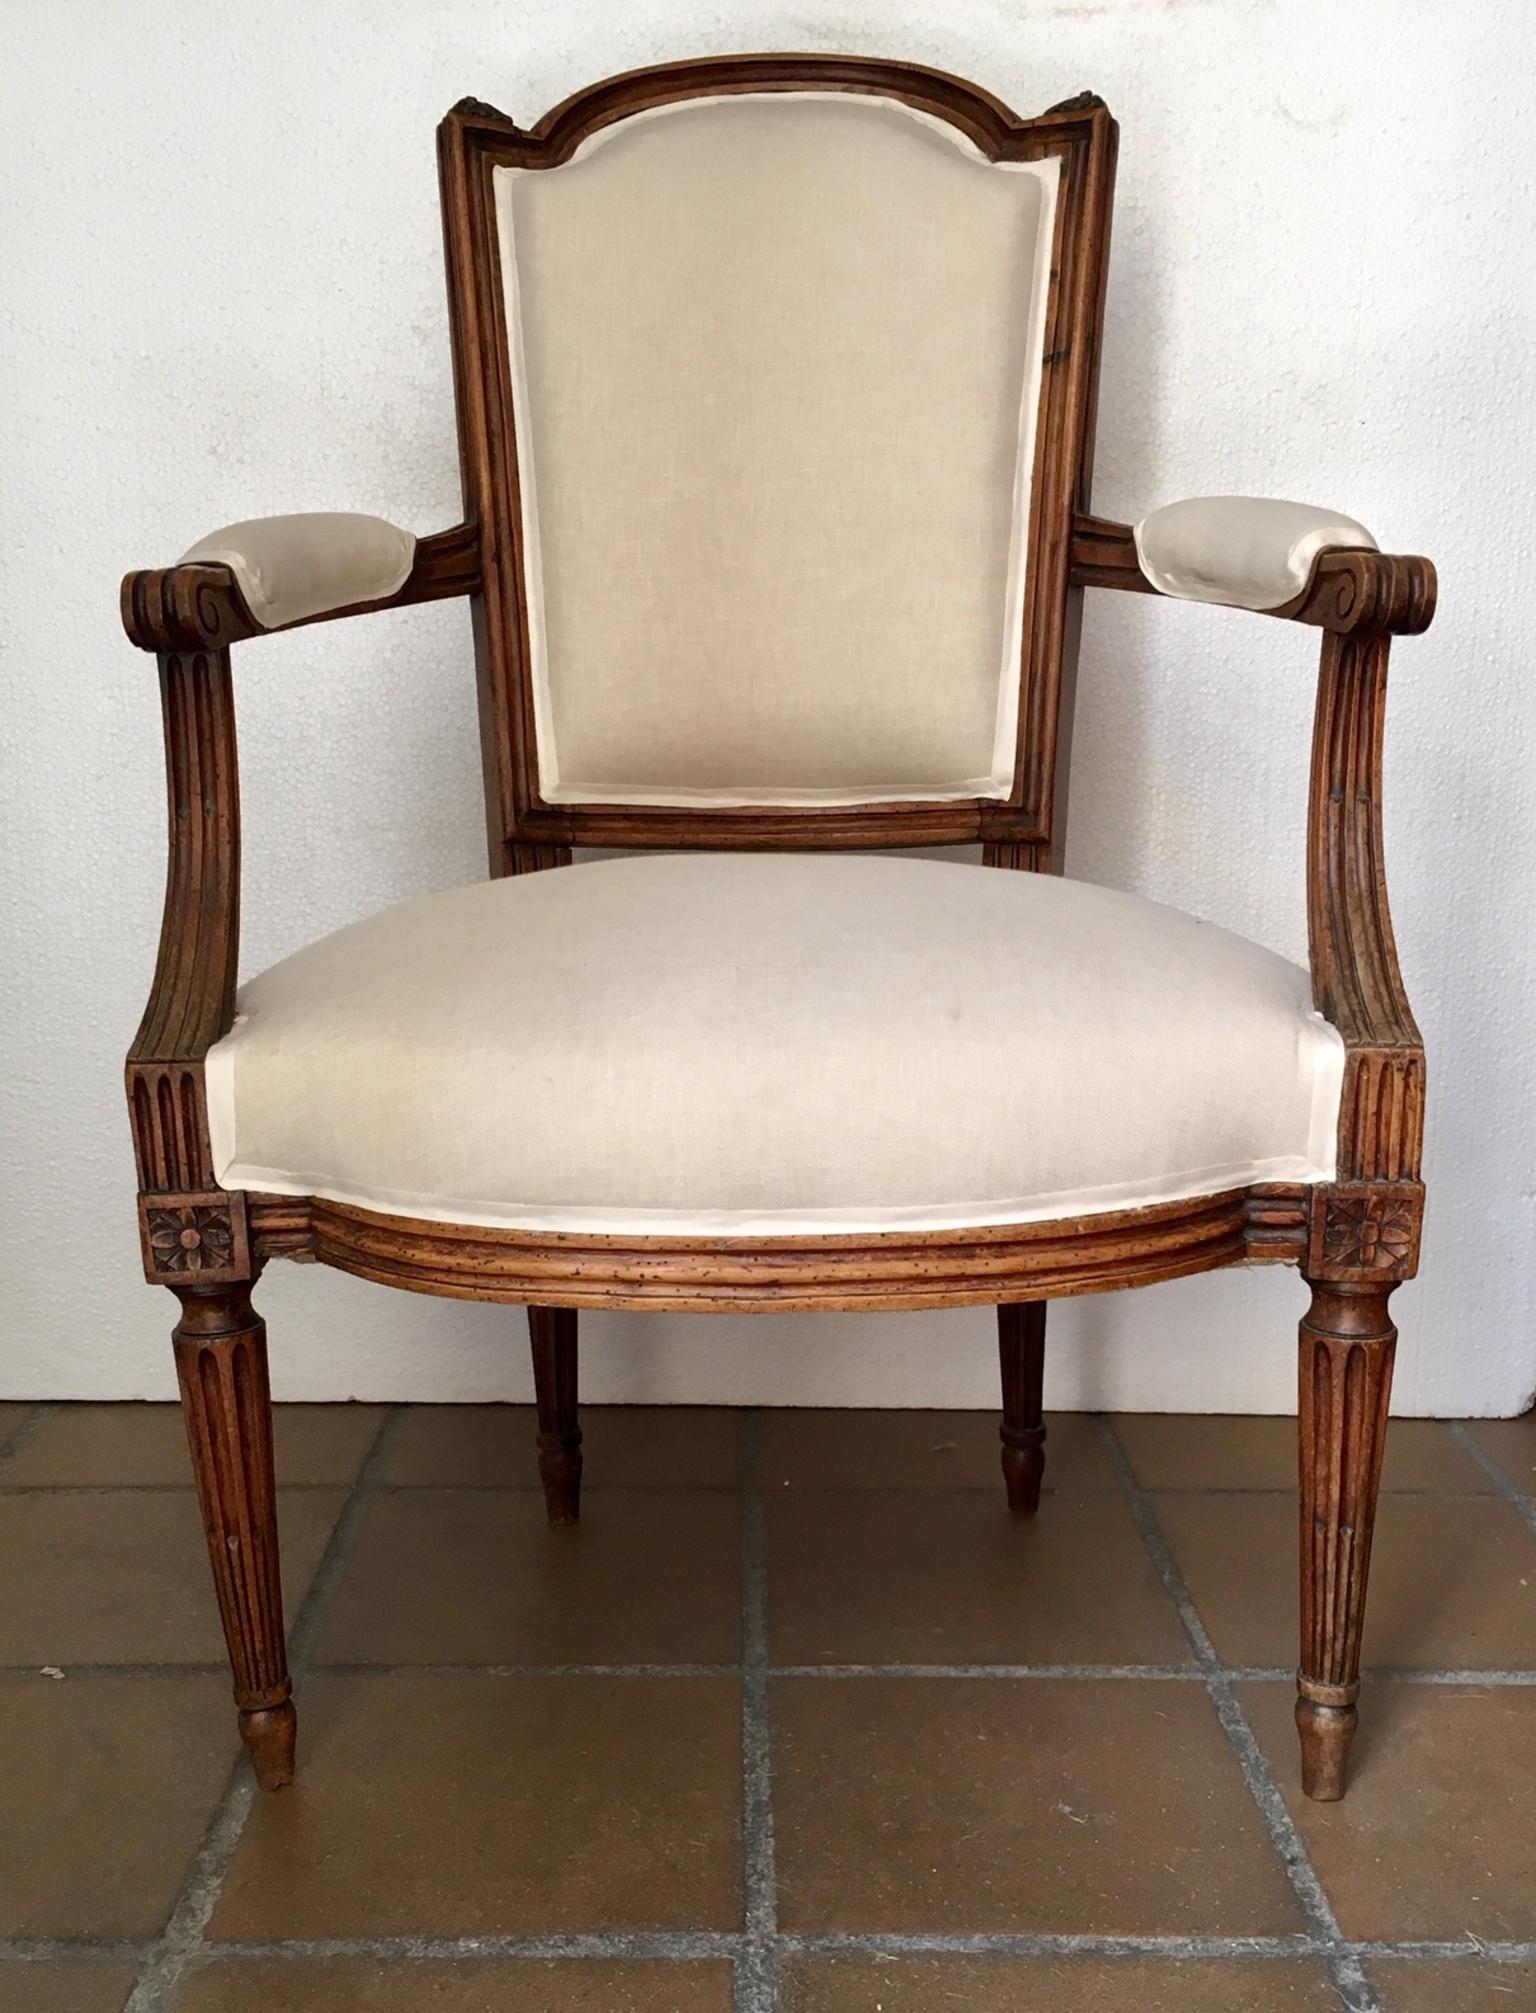 Pair of armchairs or fauteuils, Luis XVI, late 18th century, in walnut wood with back sculpted in guilloche, on fluted tapering legs, the interior has been reinforced and restored, upholstery.